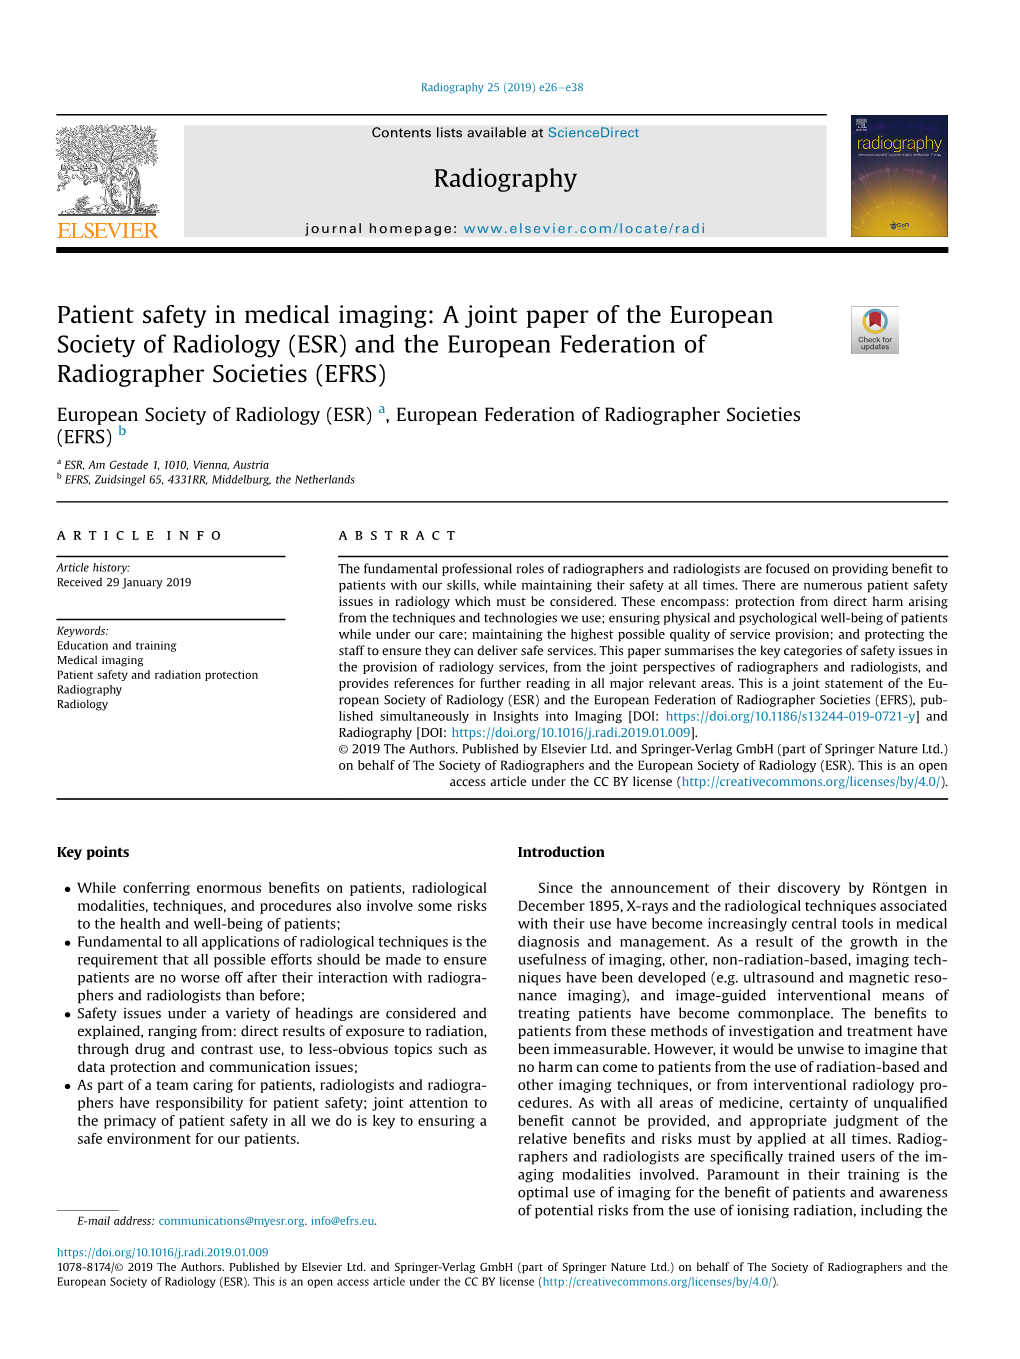 Patient Safety in Medical Imaging: a Joint Paper of the European Society of Radiology (ESR) and the European Federation of Radiographer Societies (EFRS)